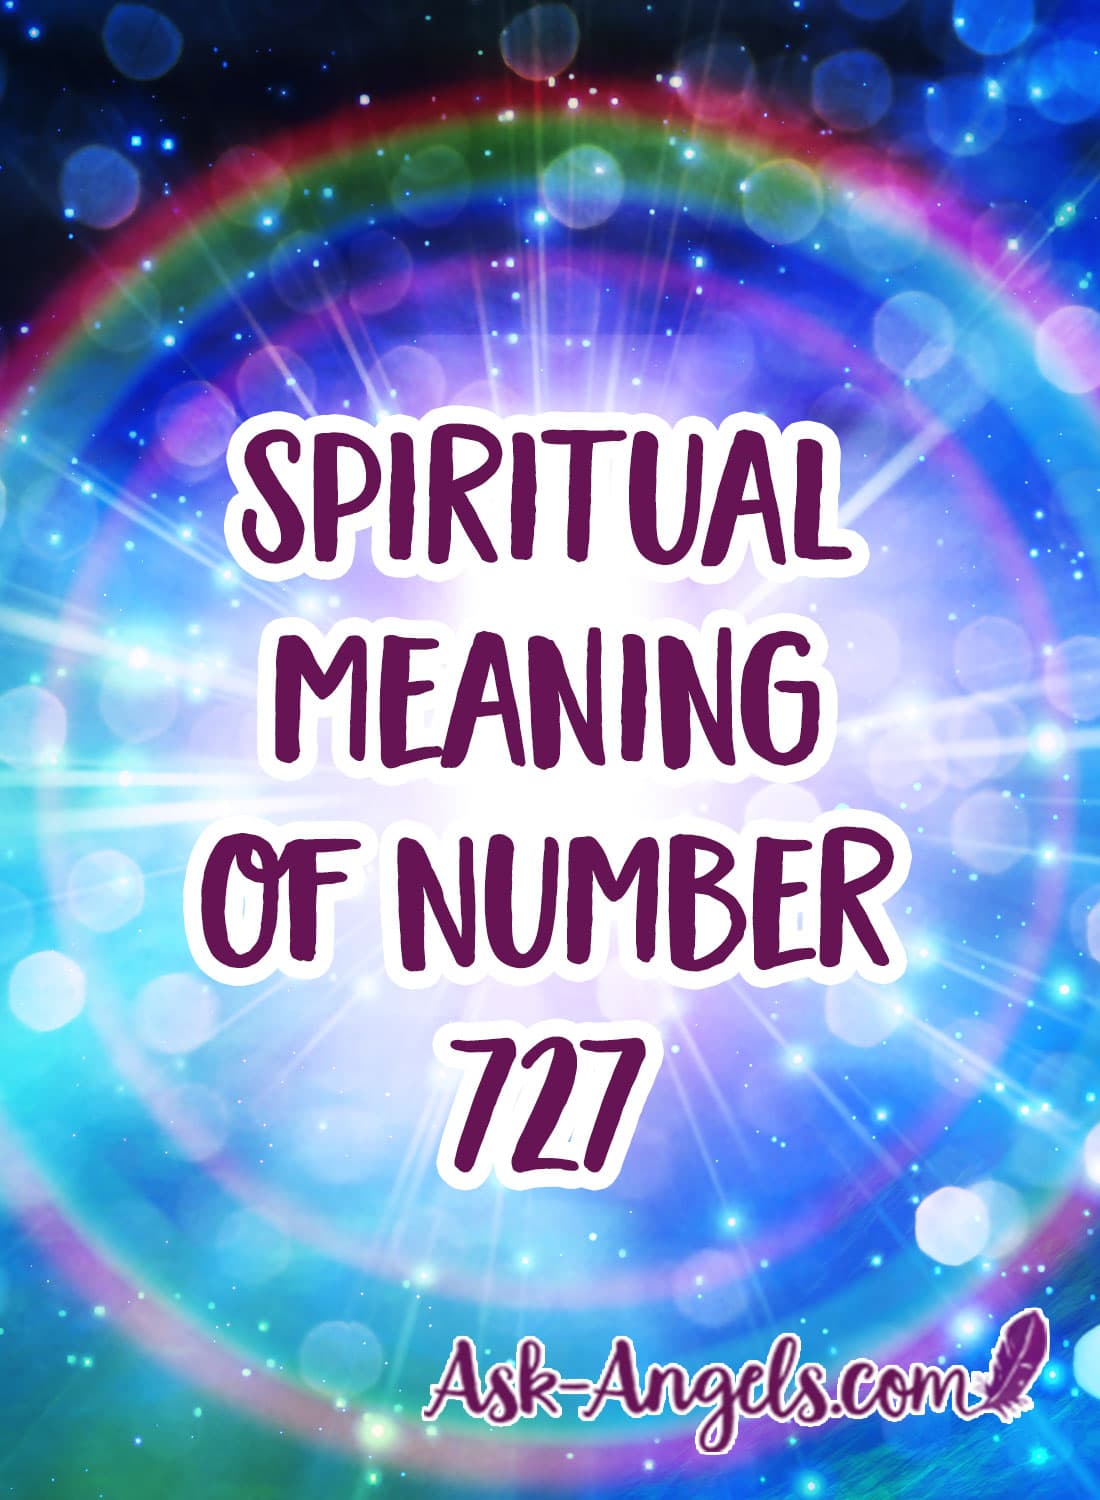 spiritual meaning of number 727